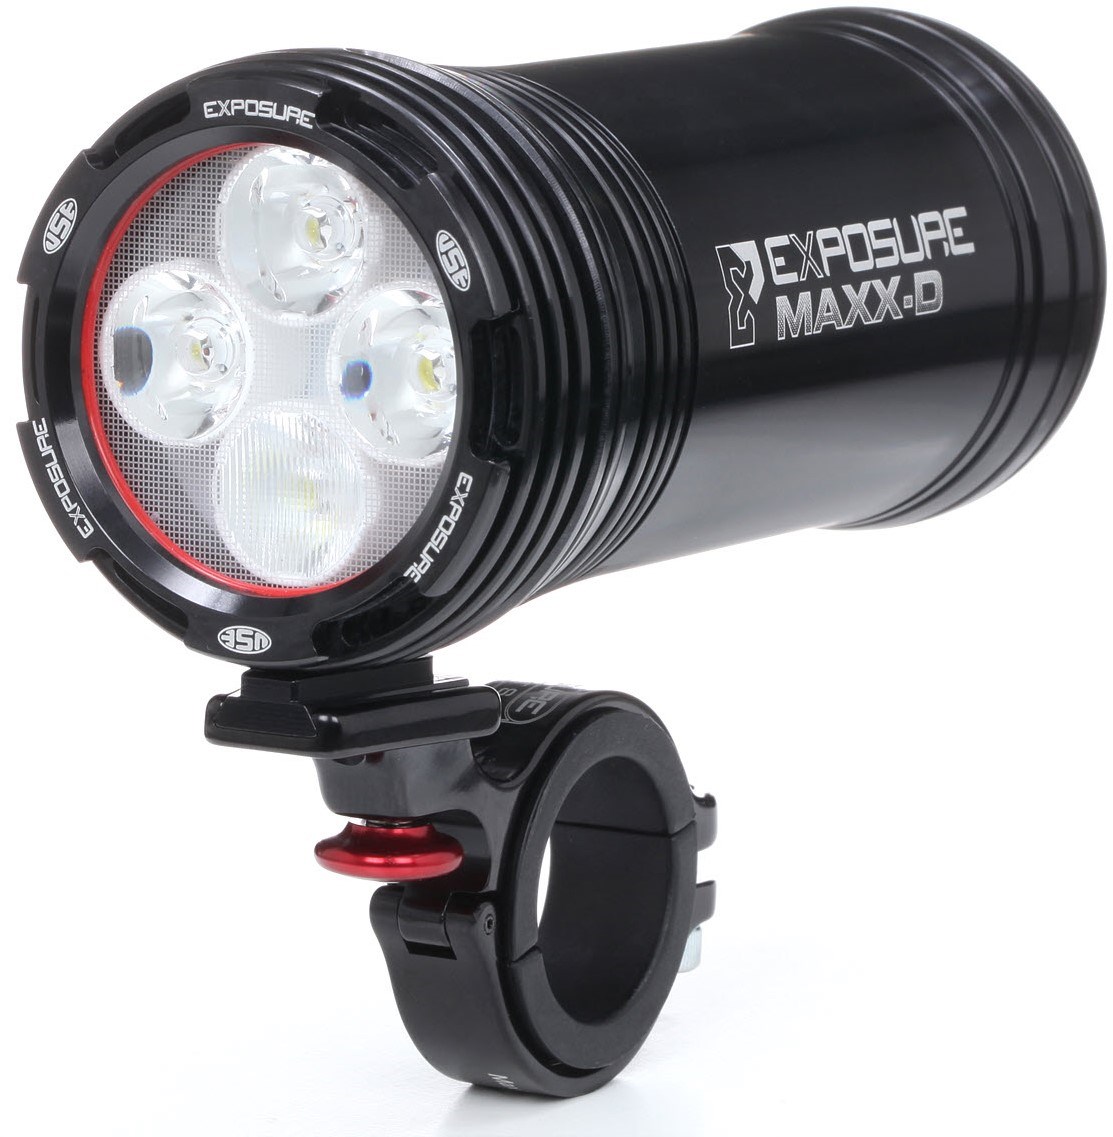 Exposure Race Mk9 Rechargeable Front Light product image